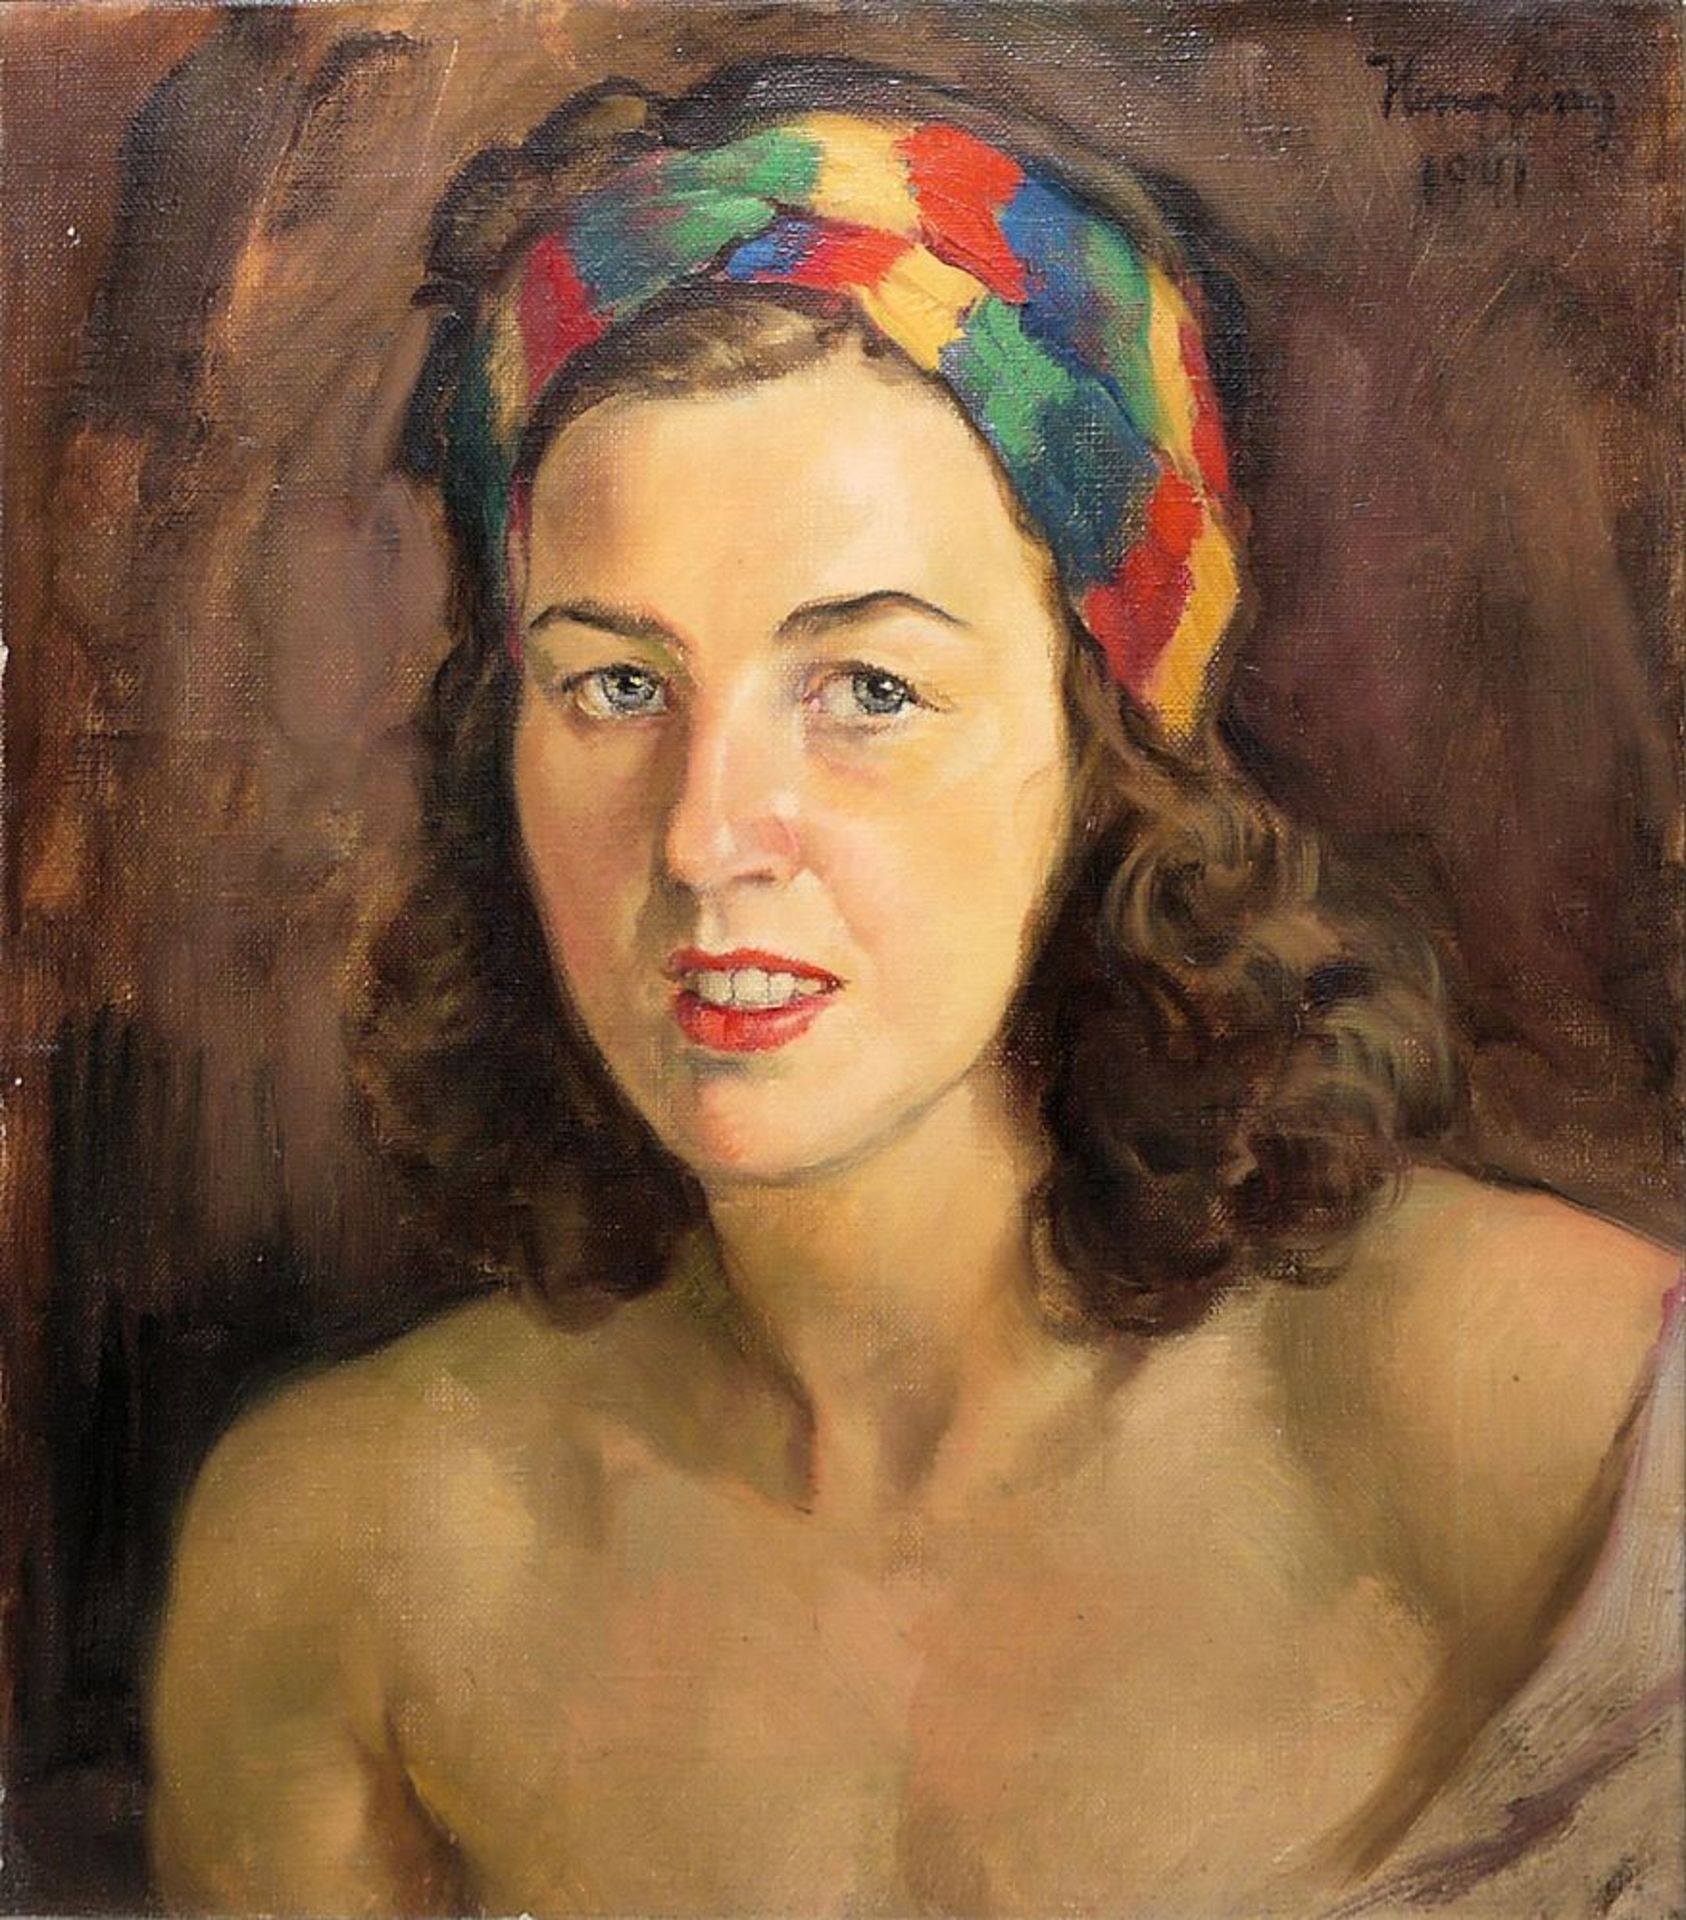 Wilhelm Hempfing, Portrait of a Beautiful Woman with a Colourful Hair Scarf, oil painting from 1941 - Image 2 of 4